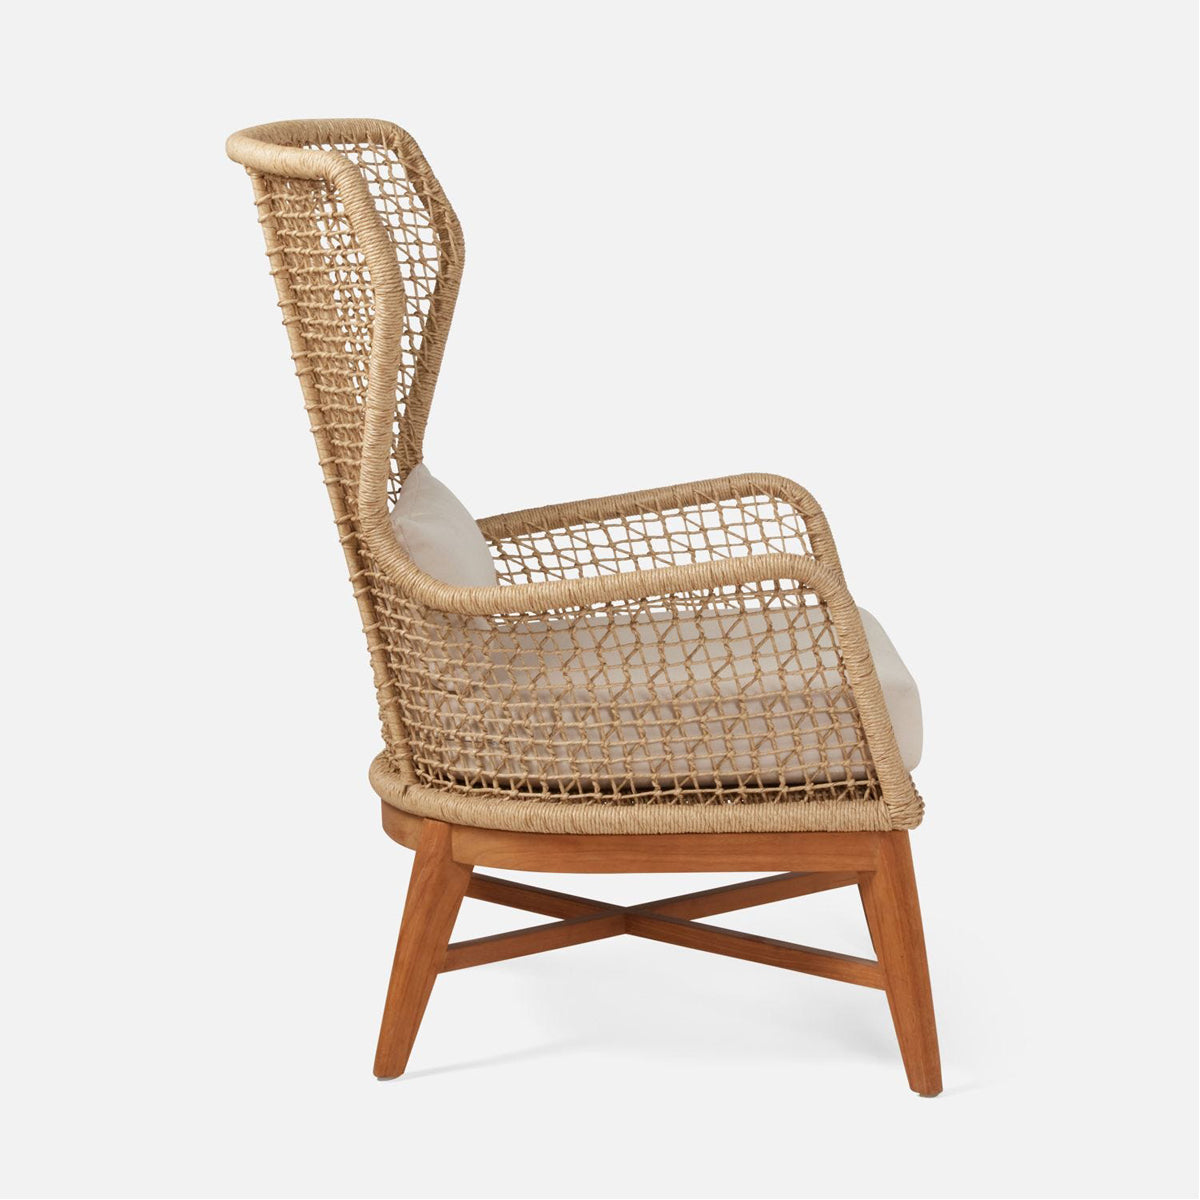 Made Goods Kalidas Wingback Outdoor Lounge Chair in Volta Fabric